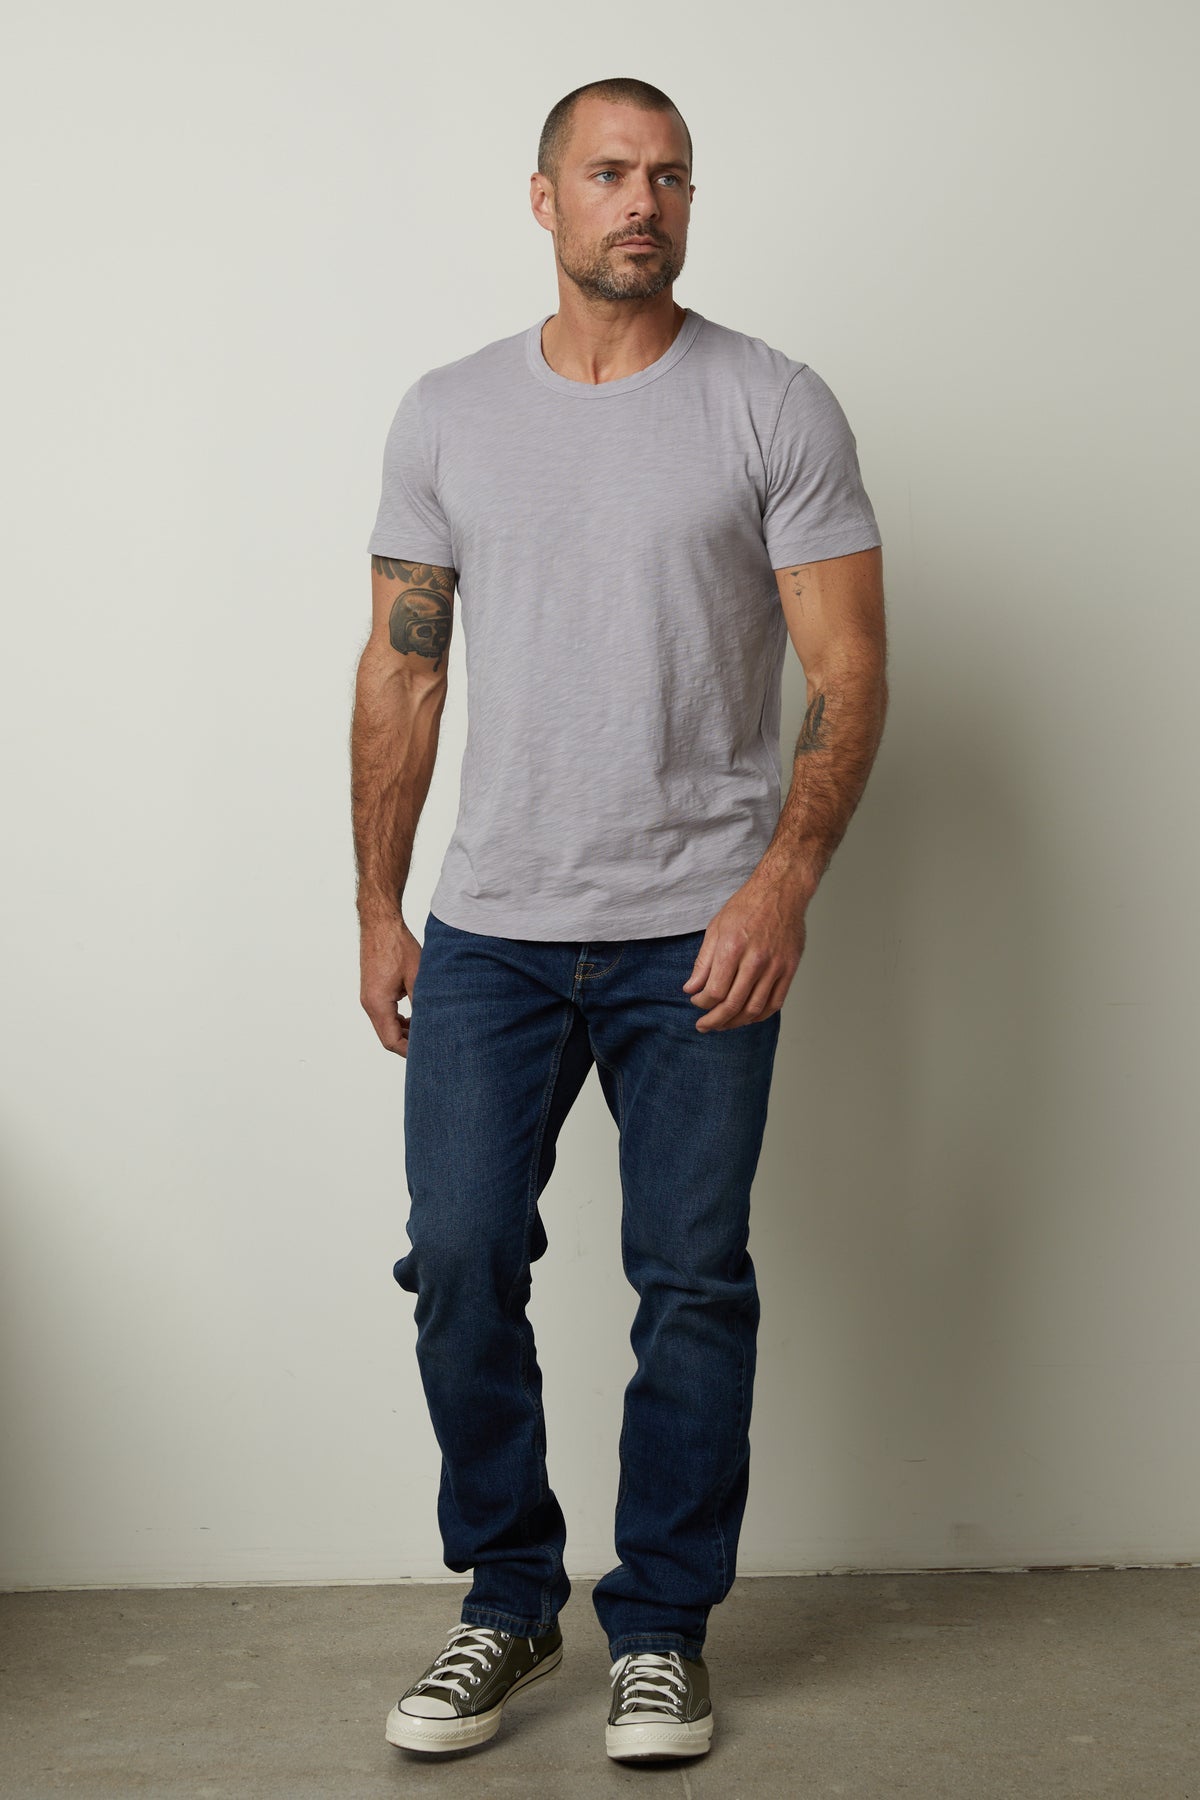 A man with short hair and tattoos on his arms stands against a plain wall, wearing a light gray, relaxed fit Velvet by Graham & Spencer AMARO TEE, blue jeans, and gray sneakers.-37229768900801